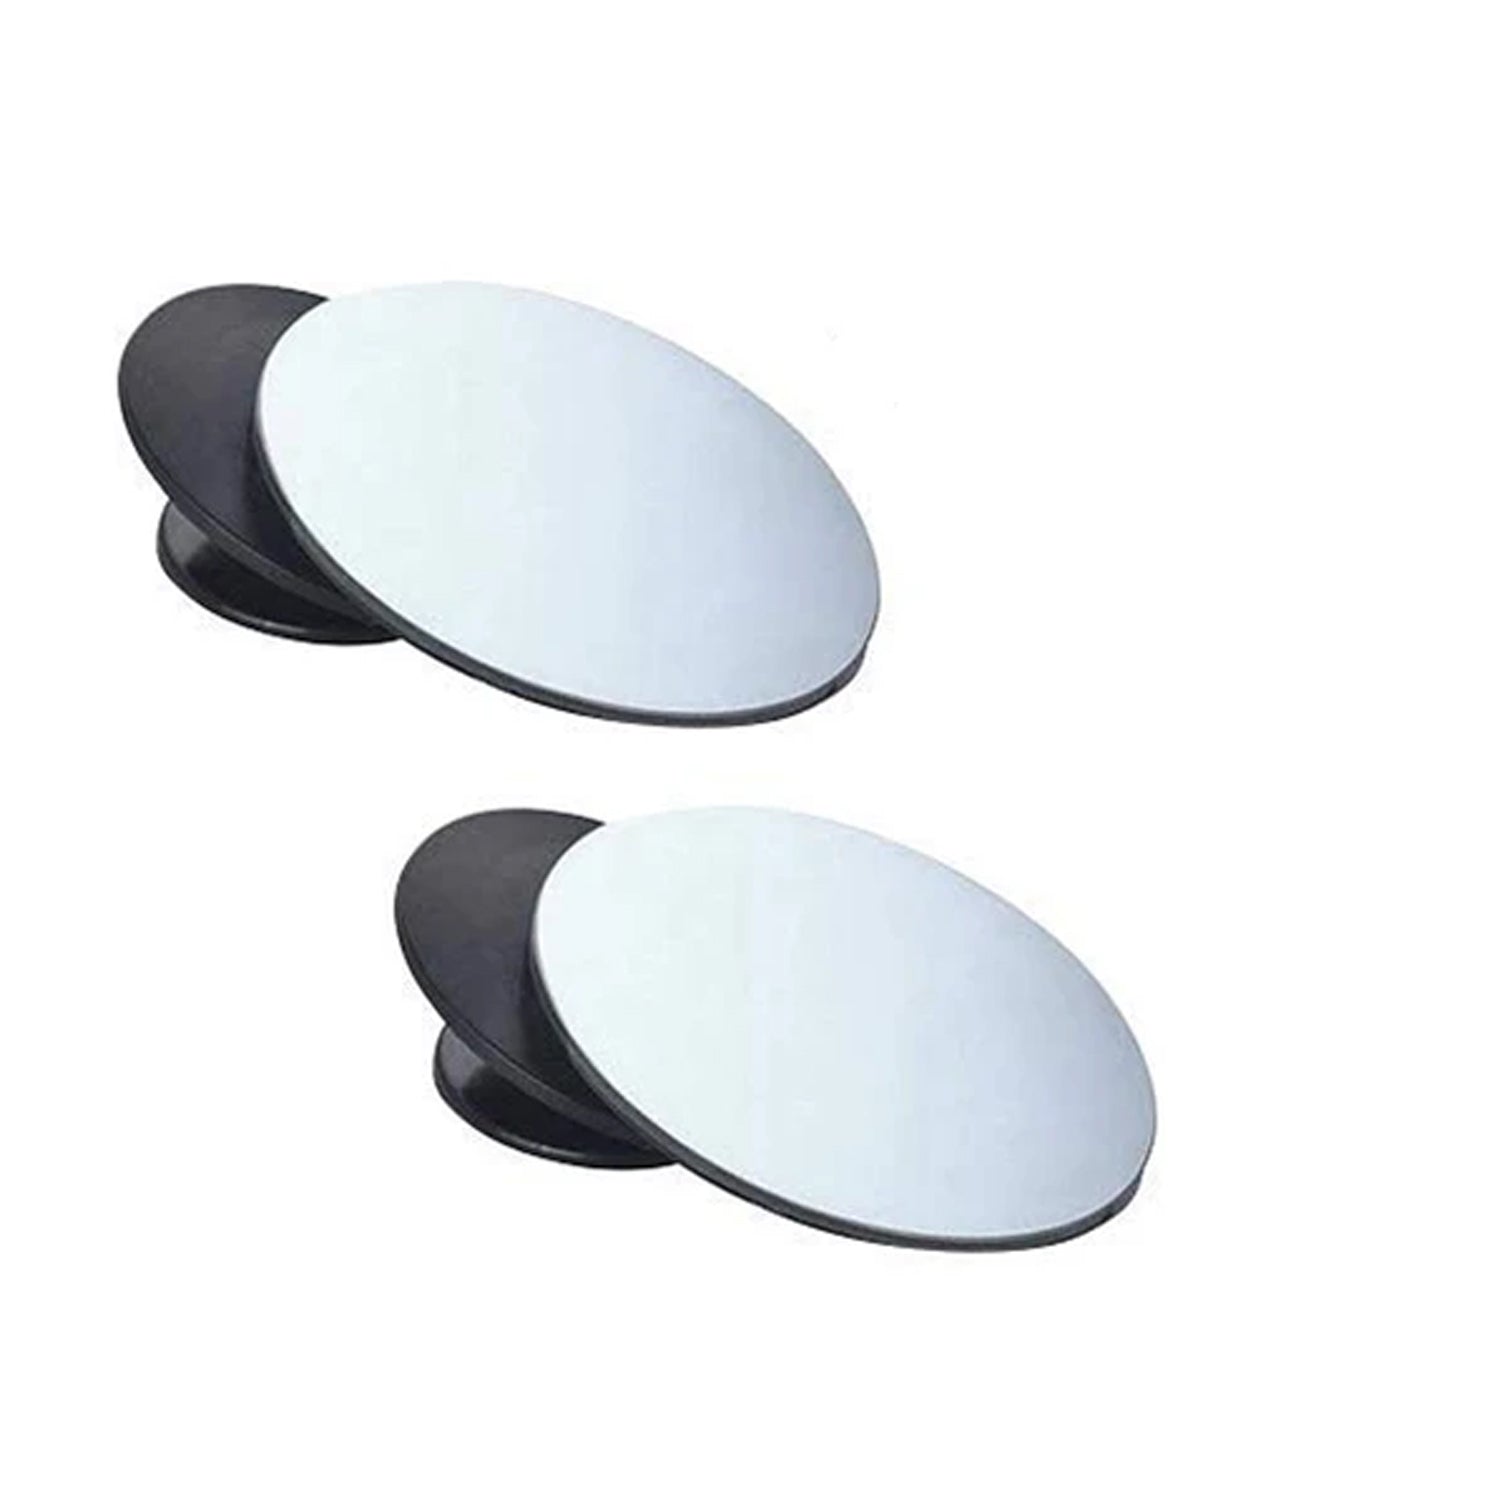 1512B Blind Spot Round Wide Angle Adjustable Convex Rear View Mirror - Pack of 2 DeoDap